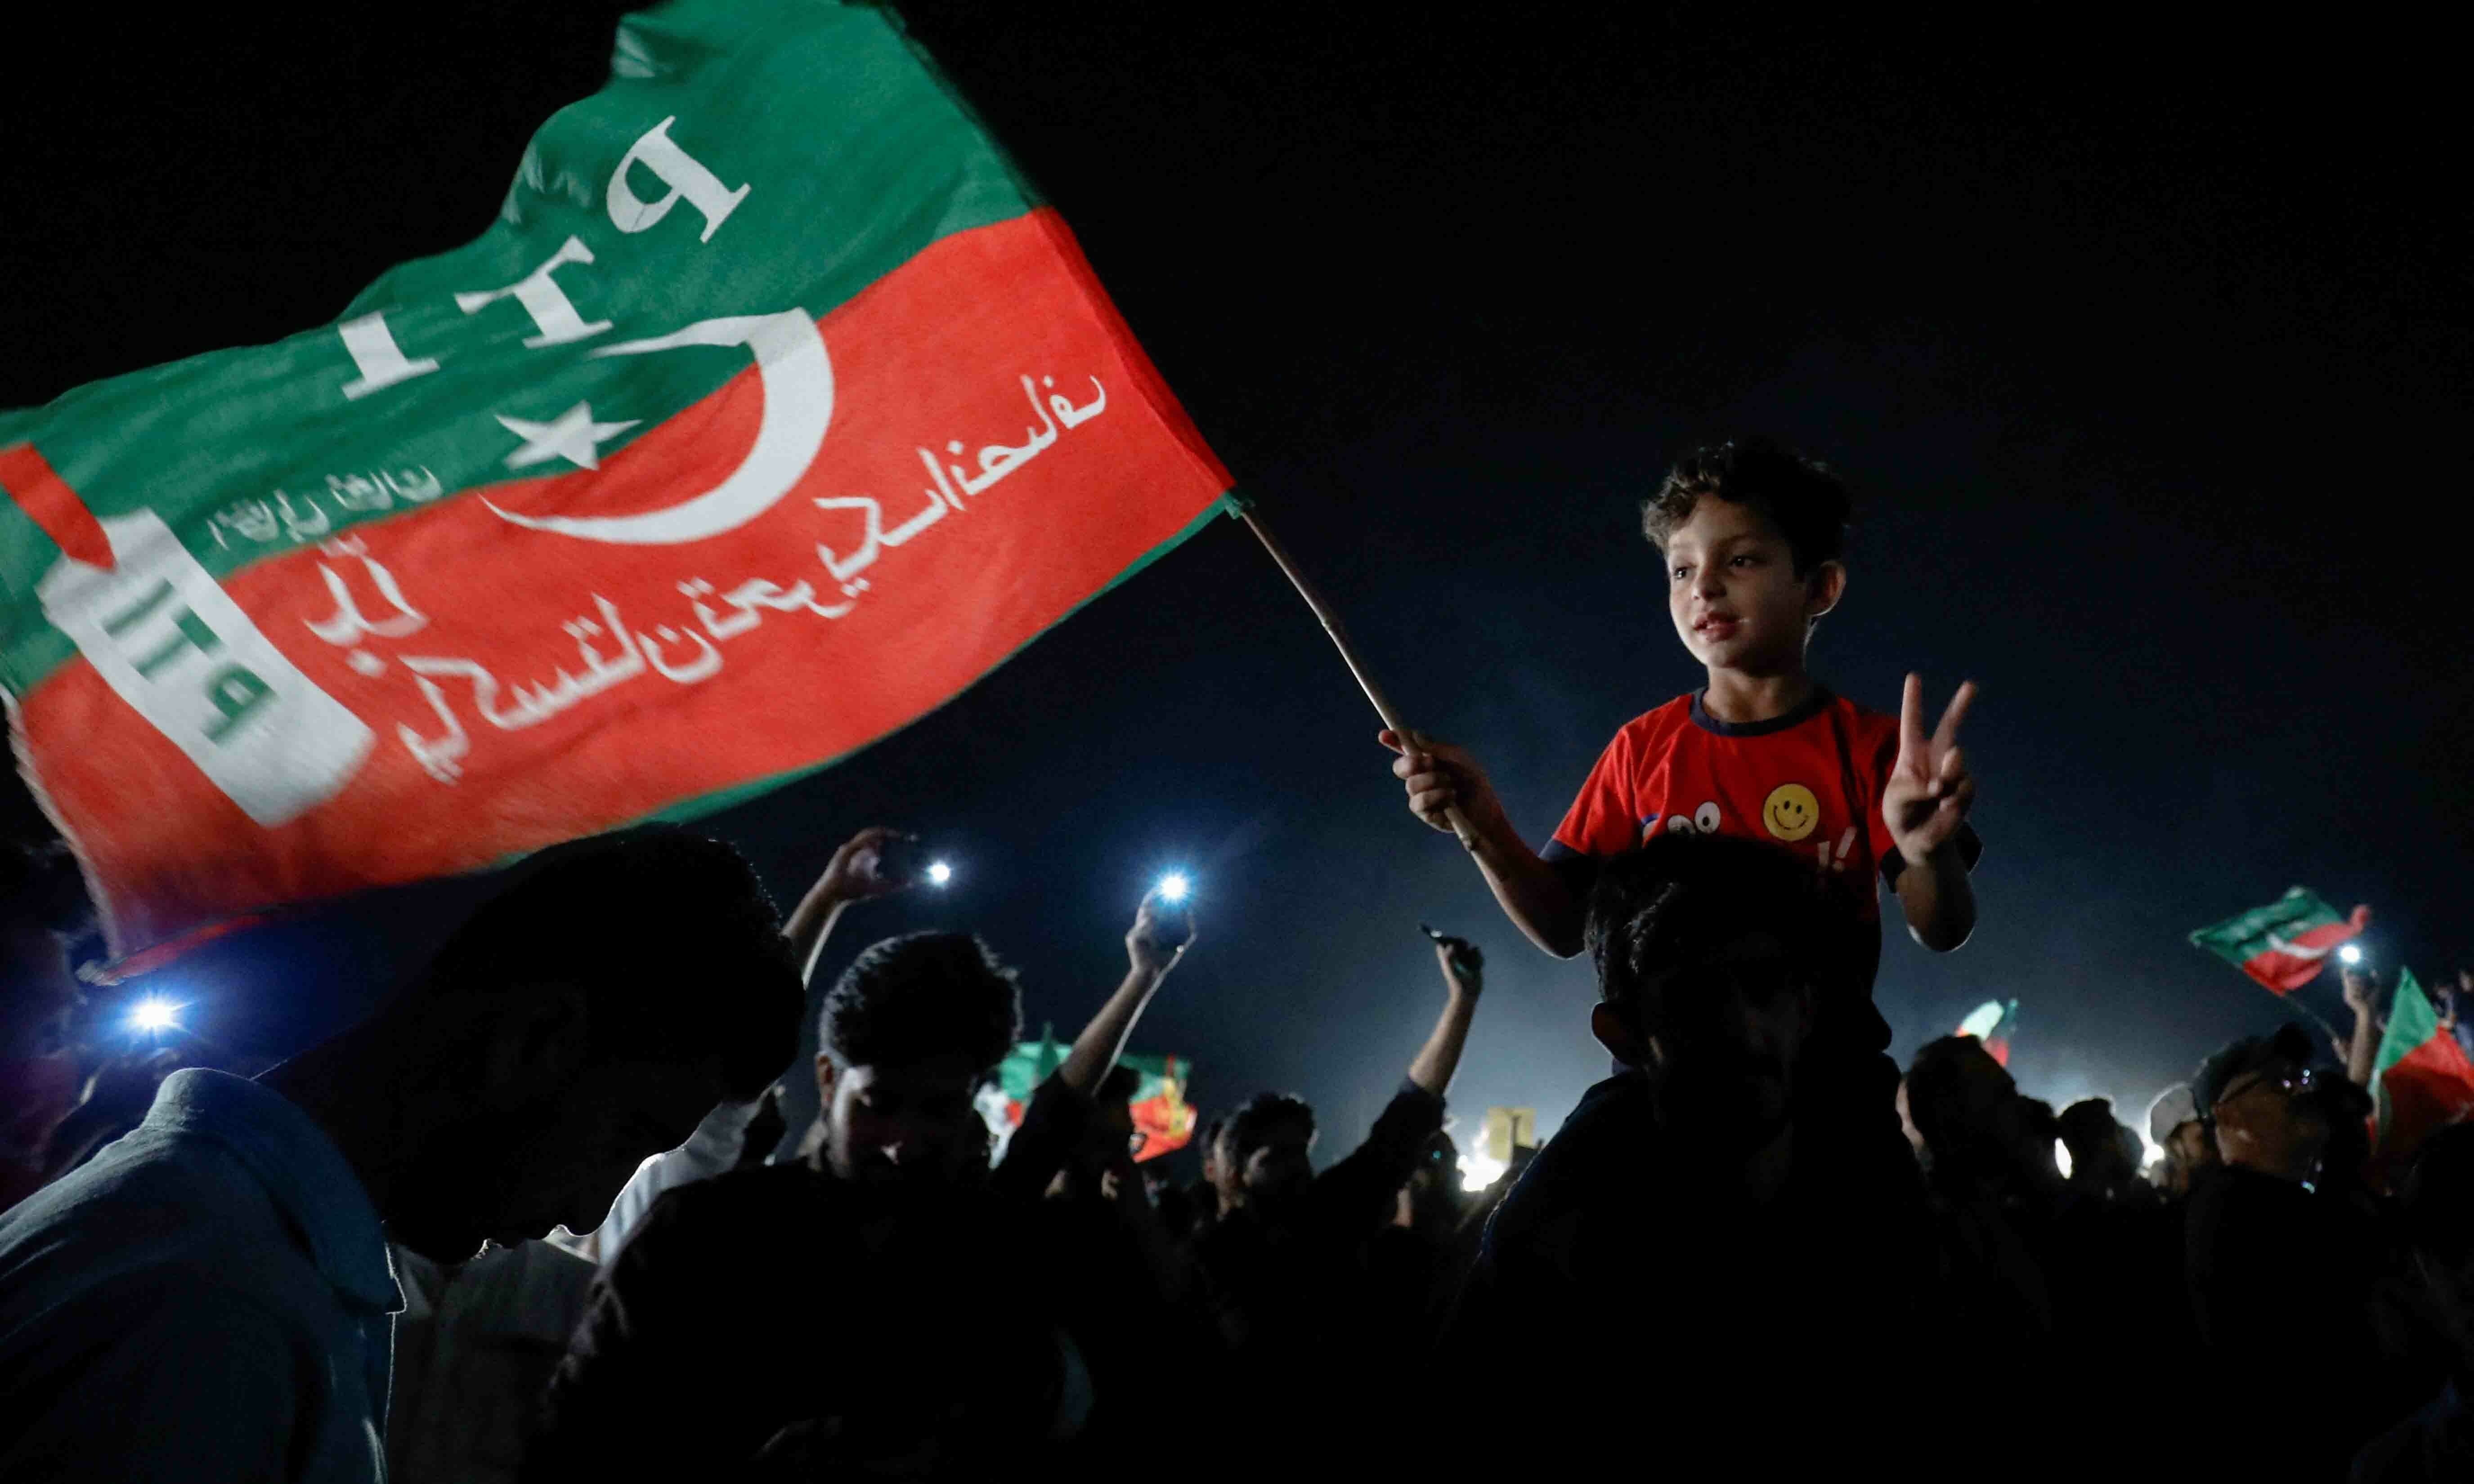 a child waves a pti flag and gestures during a rally in support of former prime minister imran khan in islamabad on april 10 reuters